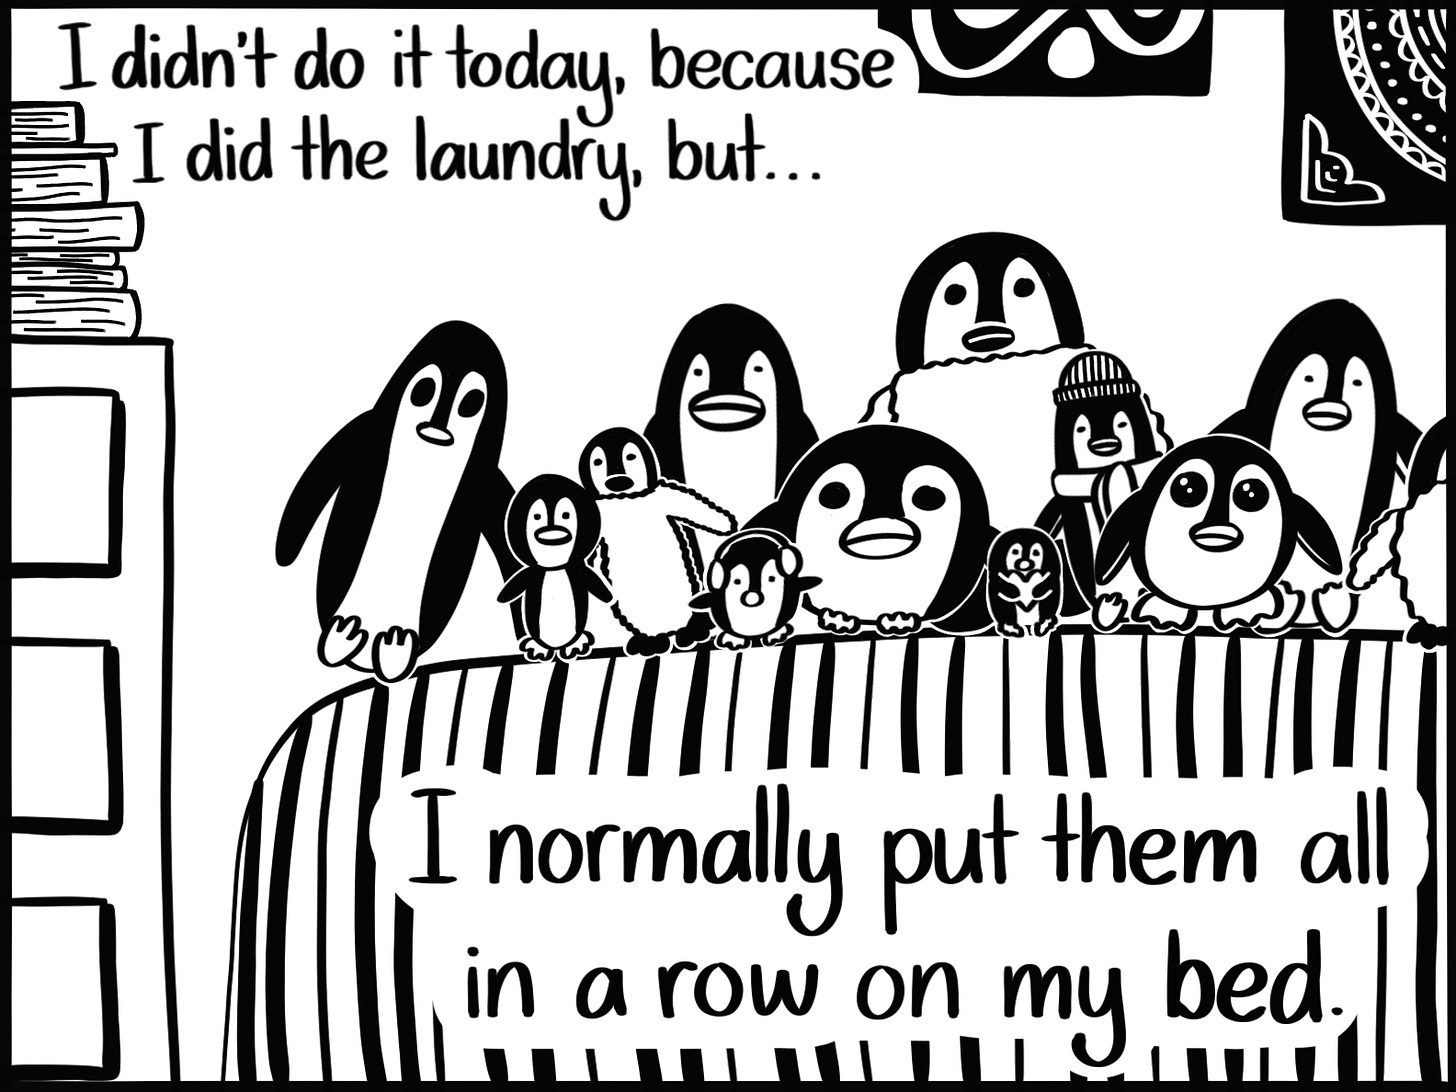 Caption: I didn't do it today, because I did the laundry, but... I normally put them all in a row on my bed. Image: Twelve stuffed penguins lined in a row on a bed in a bedroom.